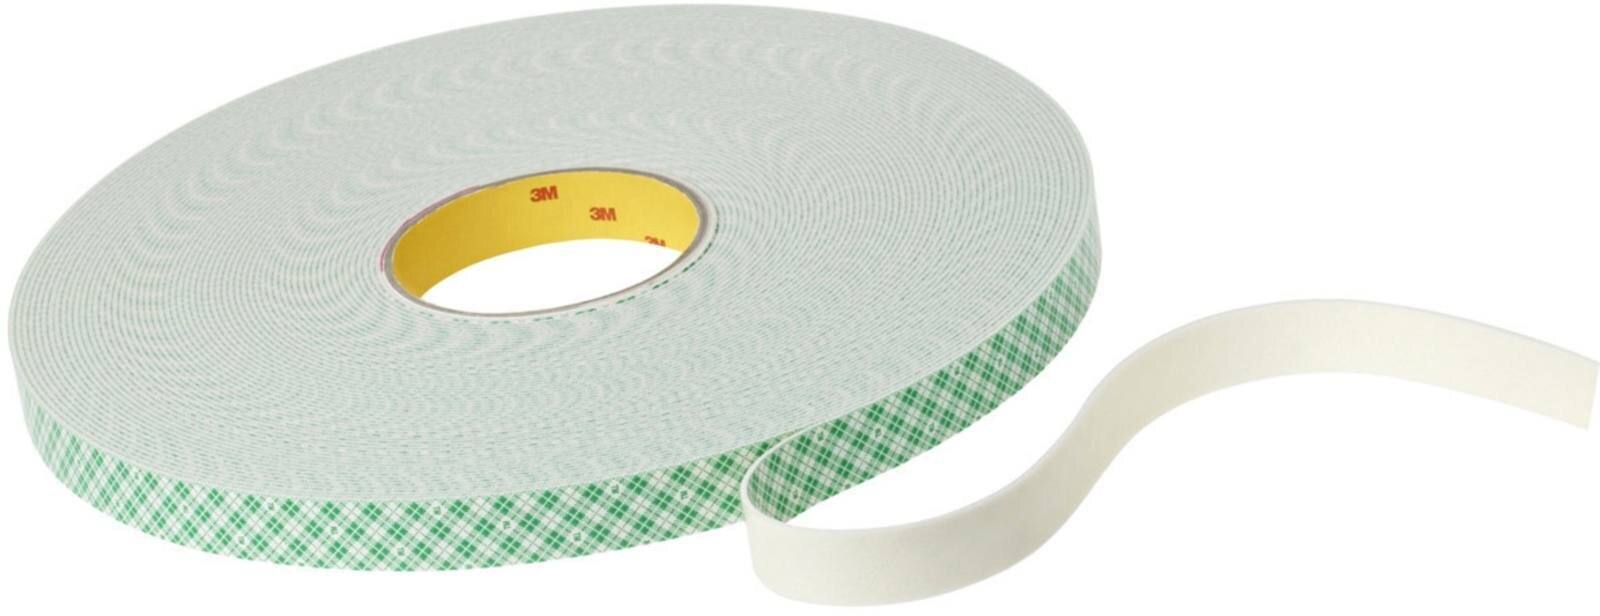 3M PU foam adhesive tape with acrylic adhesive 4026, beige, 50 mm x 33 m, 1.6 mm